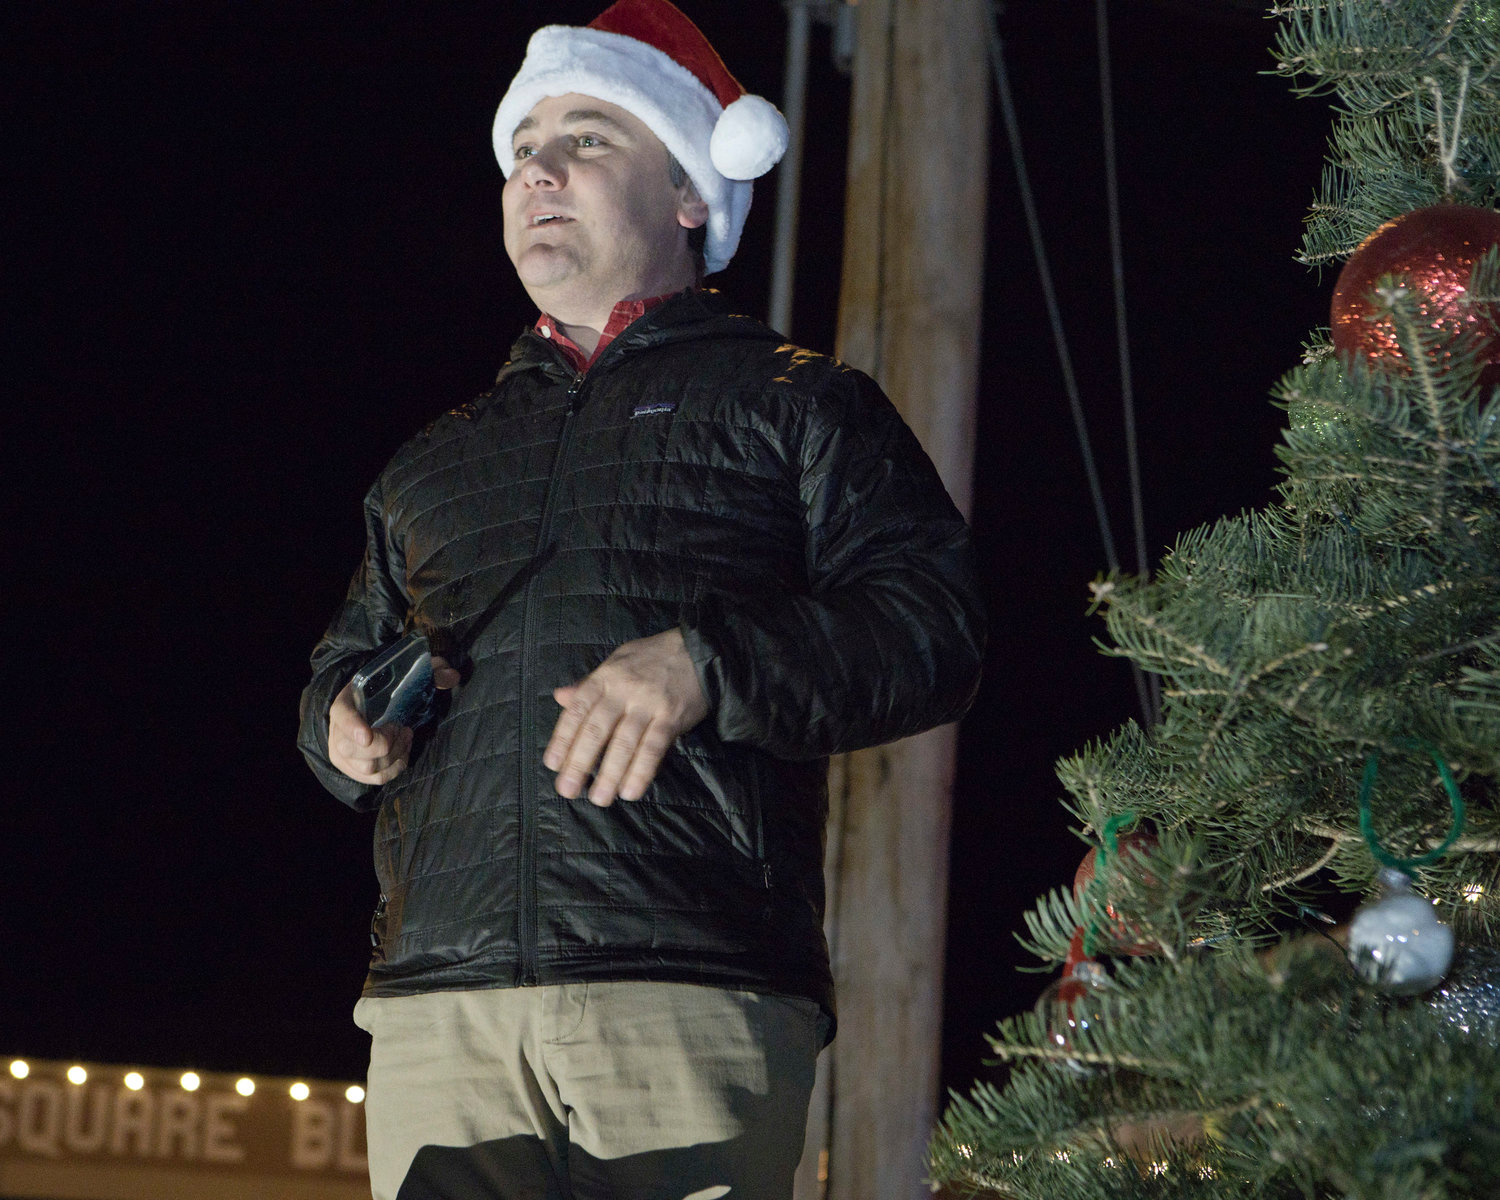 RRM board member Jason Rafferty counts down with the crowd before lighting the Riverside Square tree, Friday night.